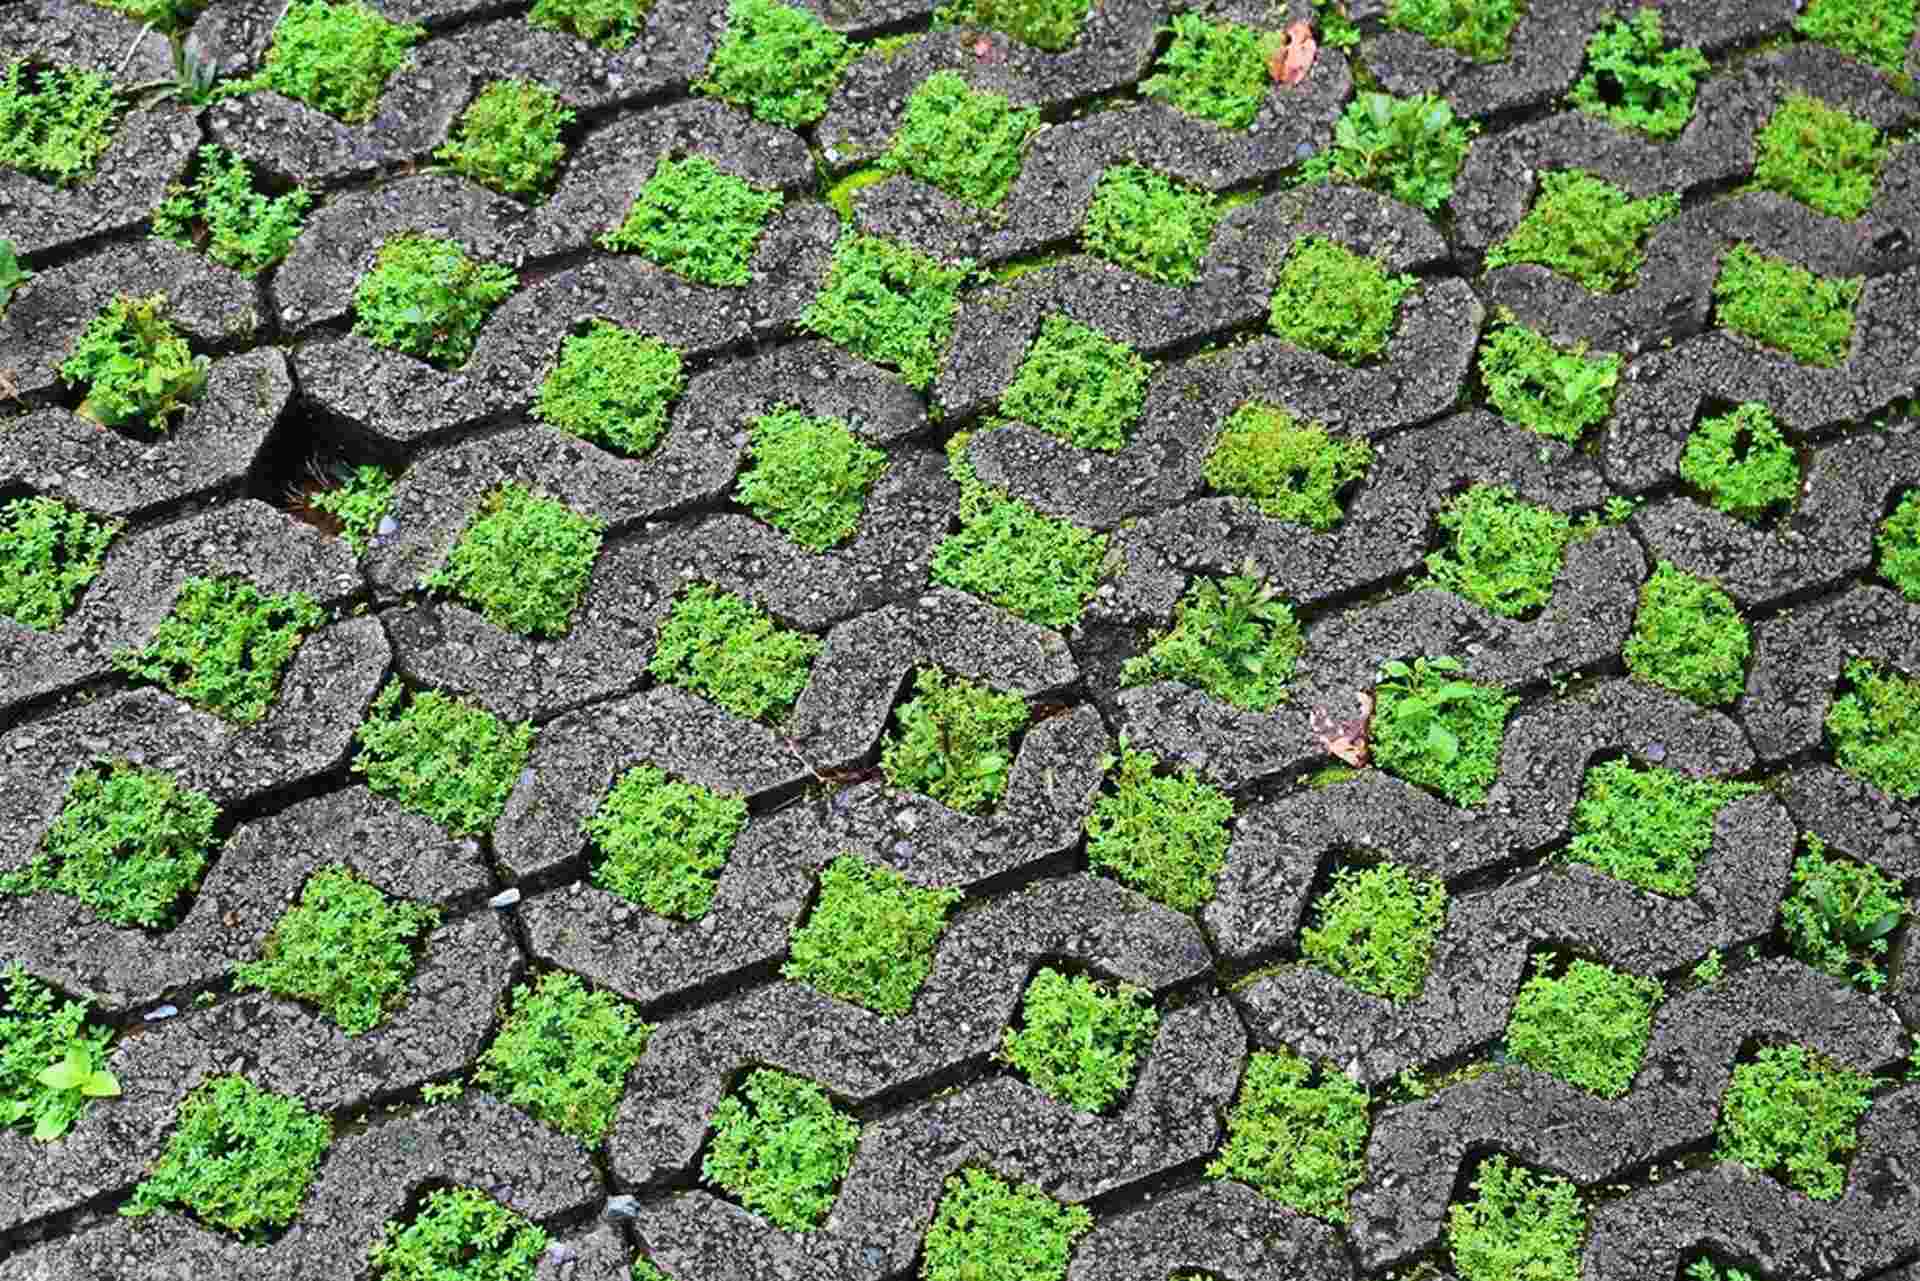 Close-up of interlocking pavement blocks with vibrant green moss growing in the gaps, highlighting an eco-friendly pavement design.